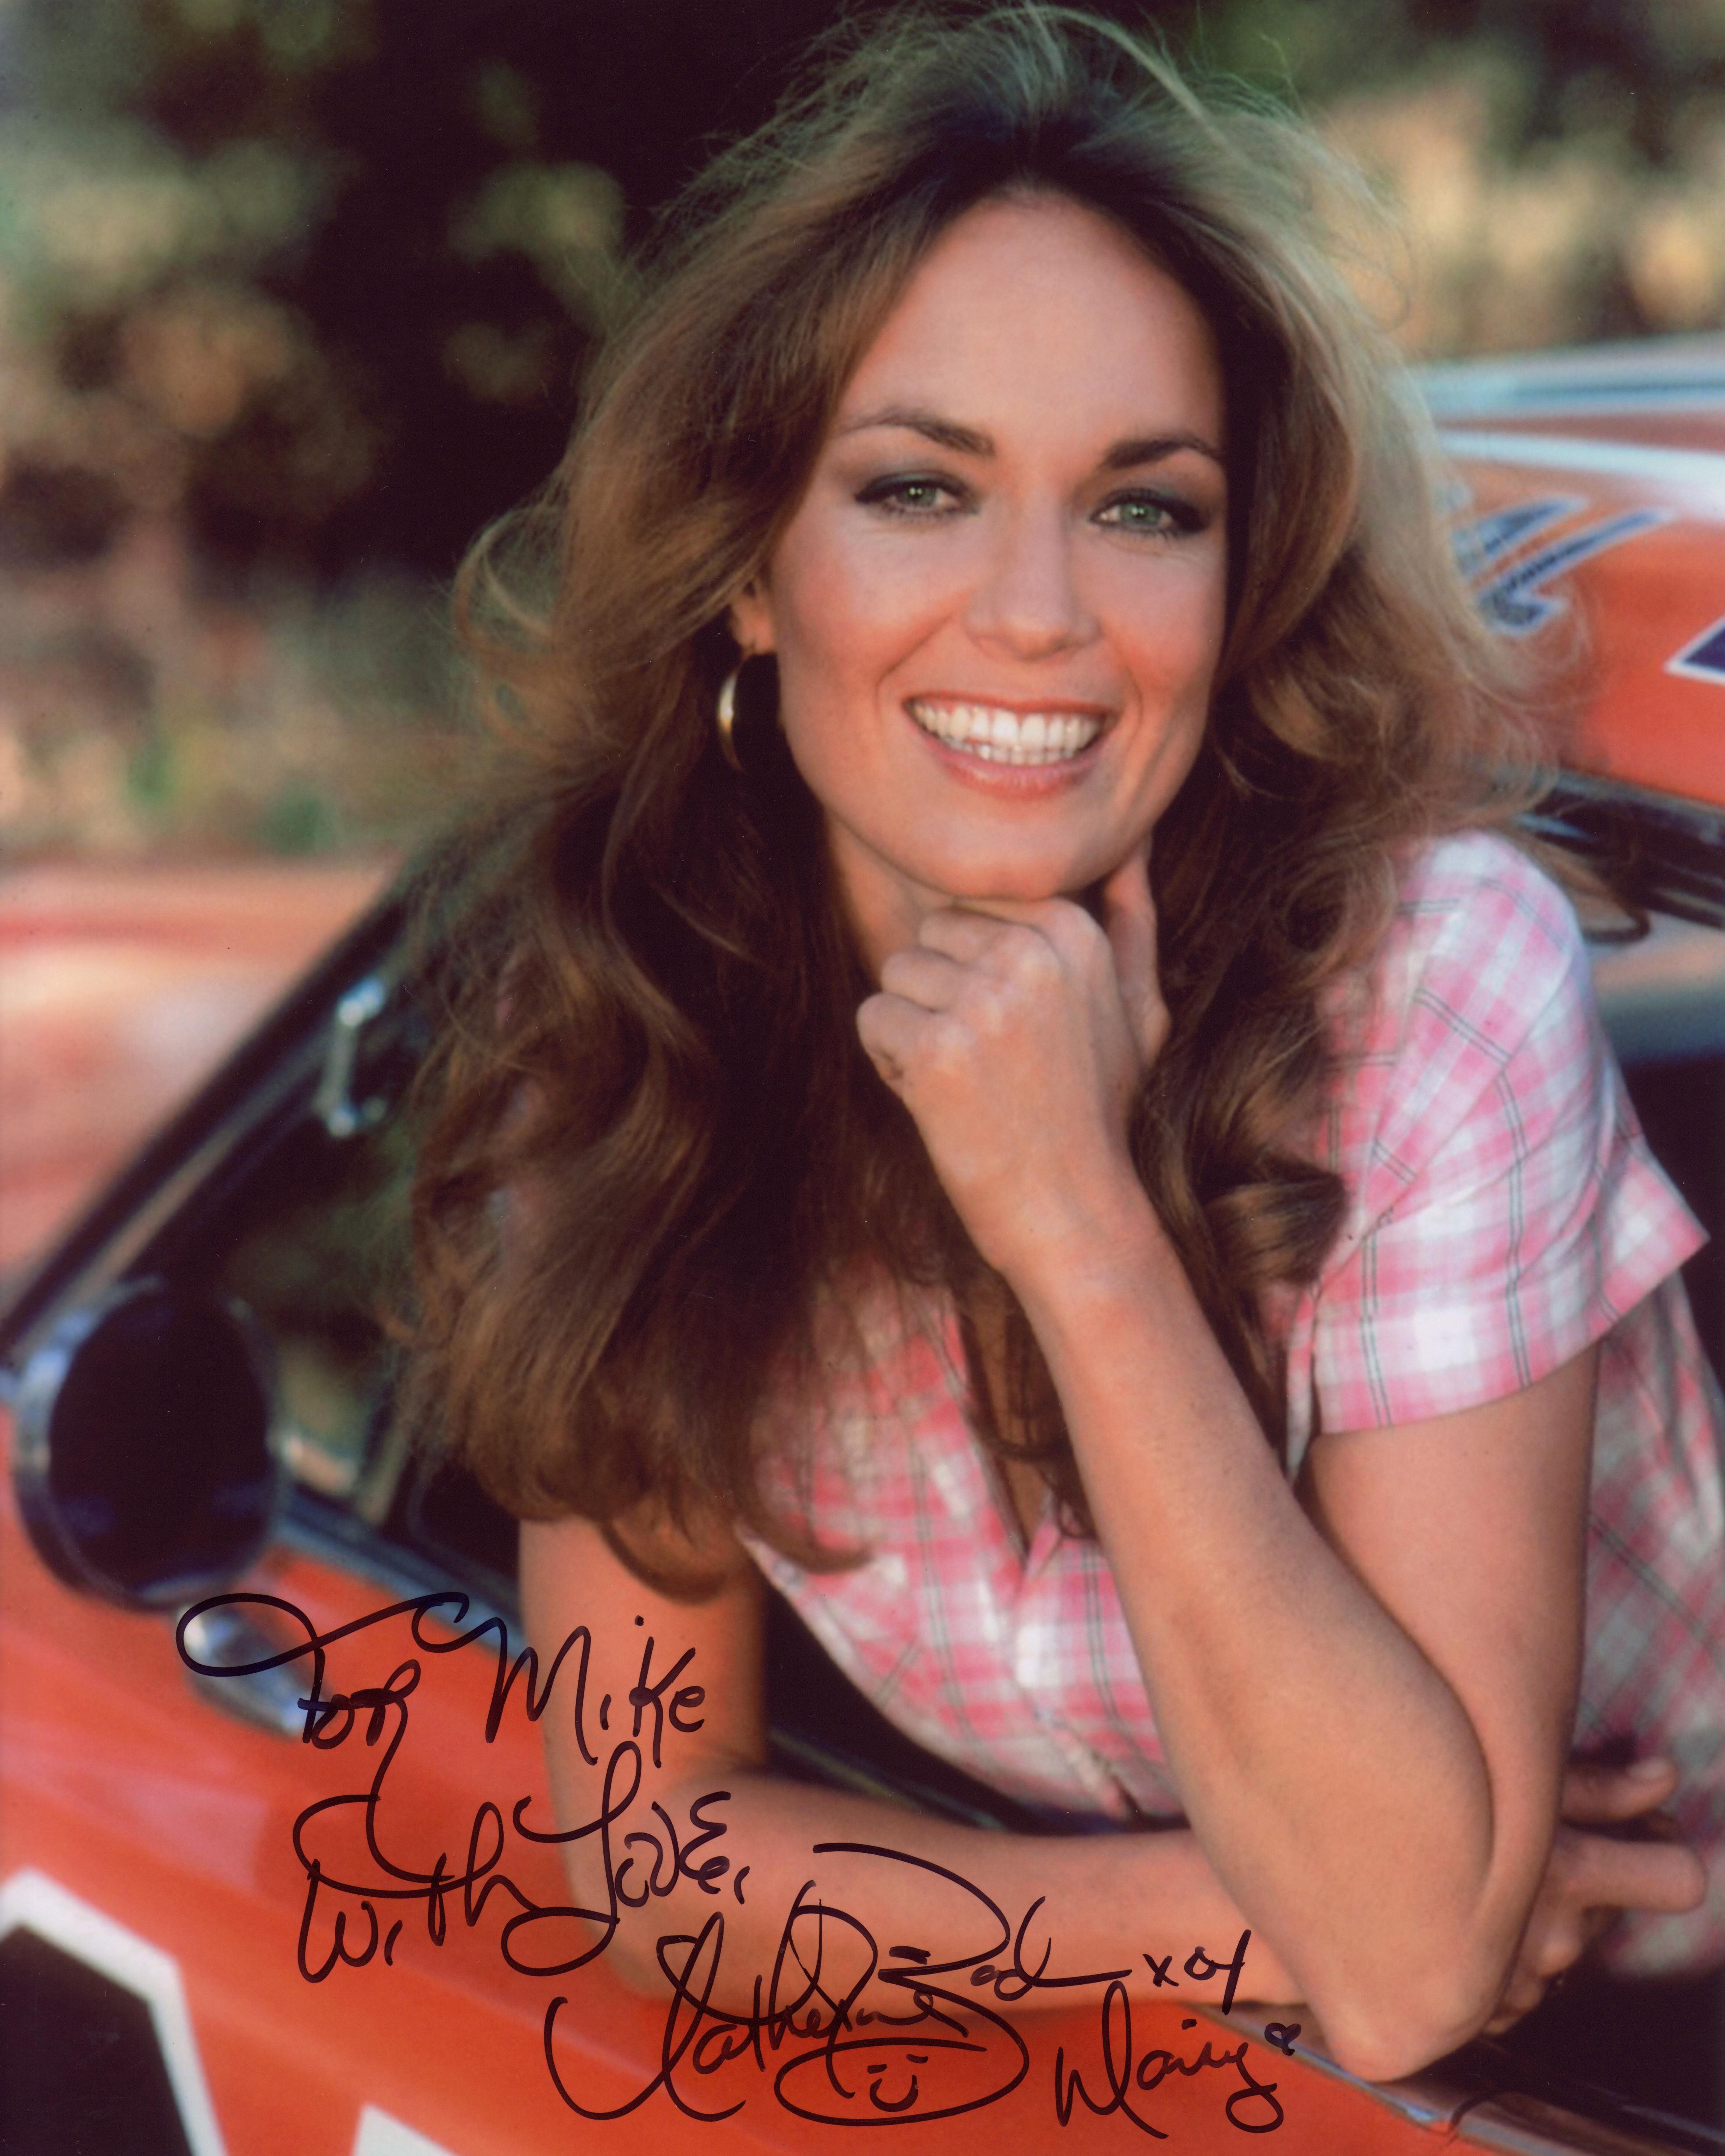 Catherine Bach Wallpapers Hd Images / Catherine bach high quality wallpaper...